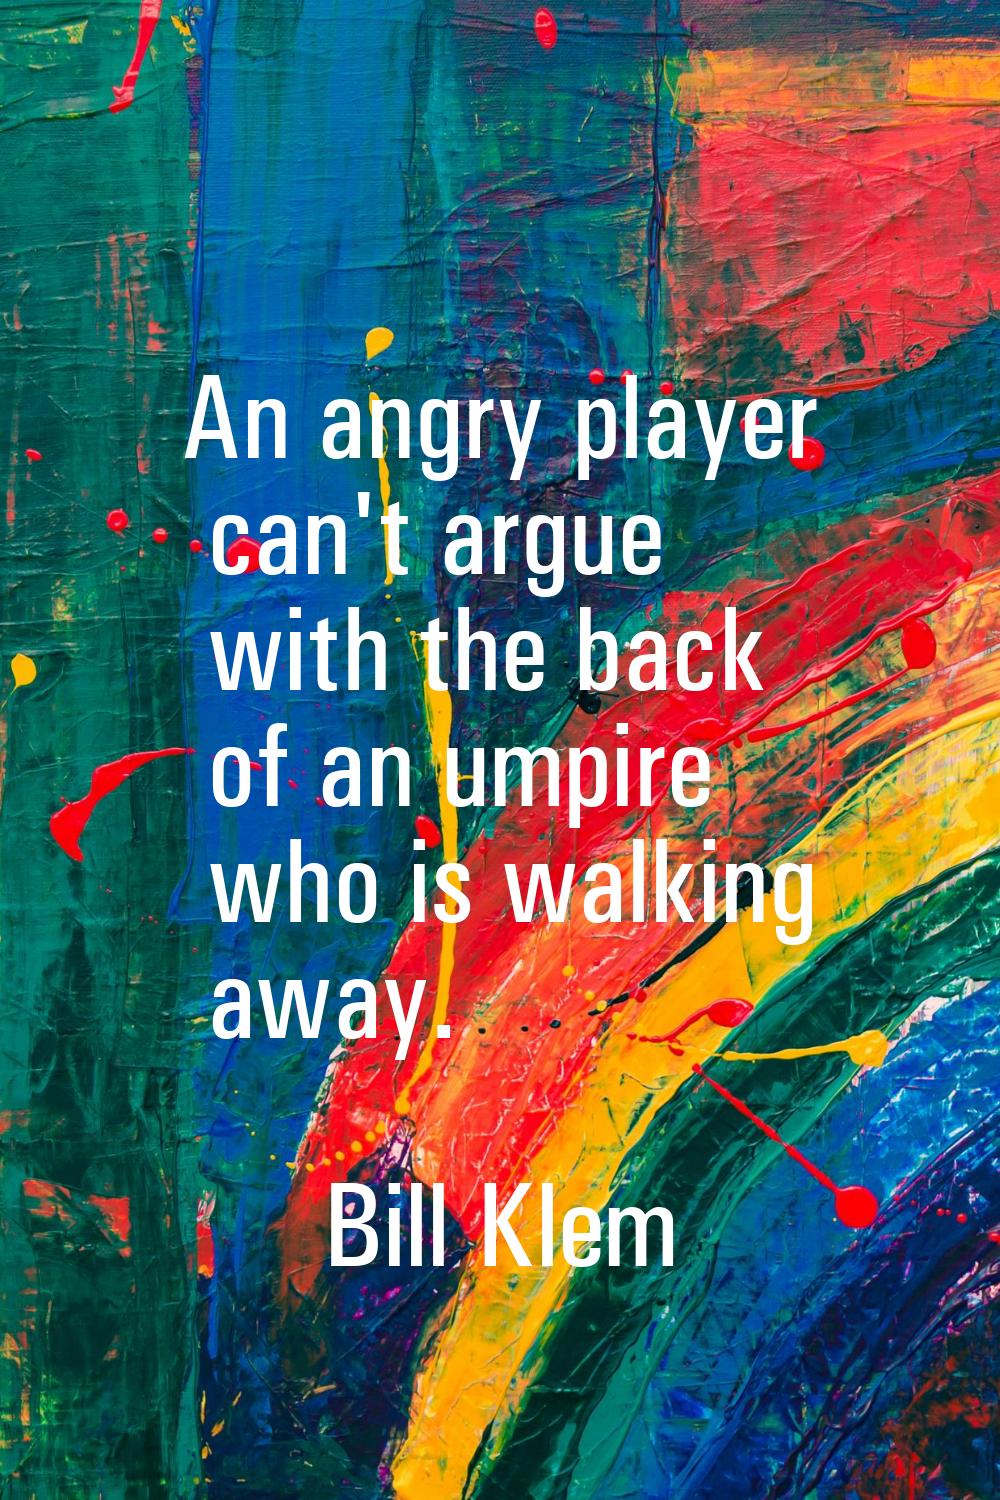 An angry player can't argue with the back of an umpire who is walking away.